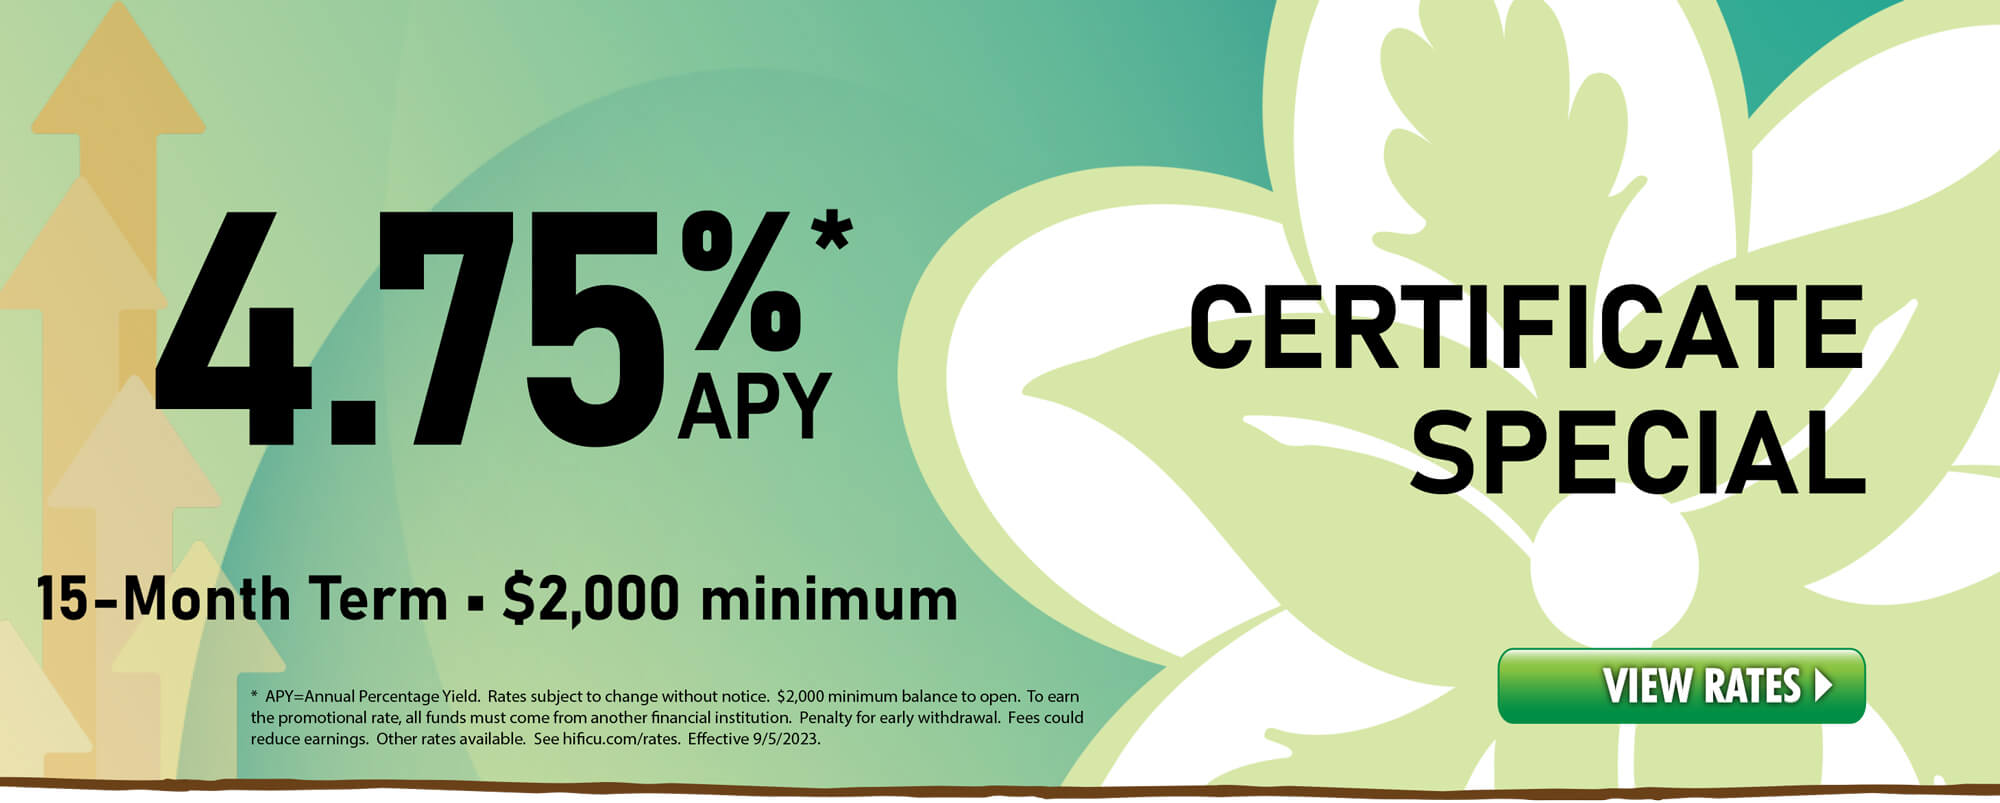 4.75% Share Certificate Special - 15-month term, $2,000 minimum balance.  Open an account today!